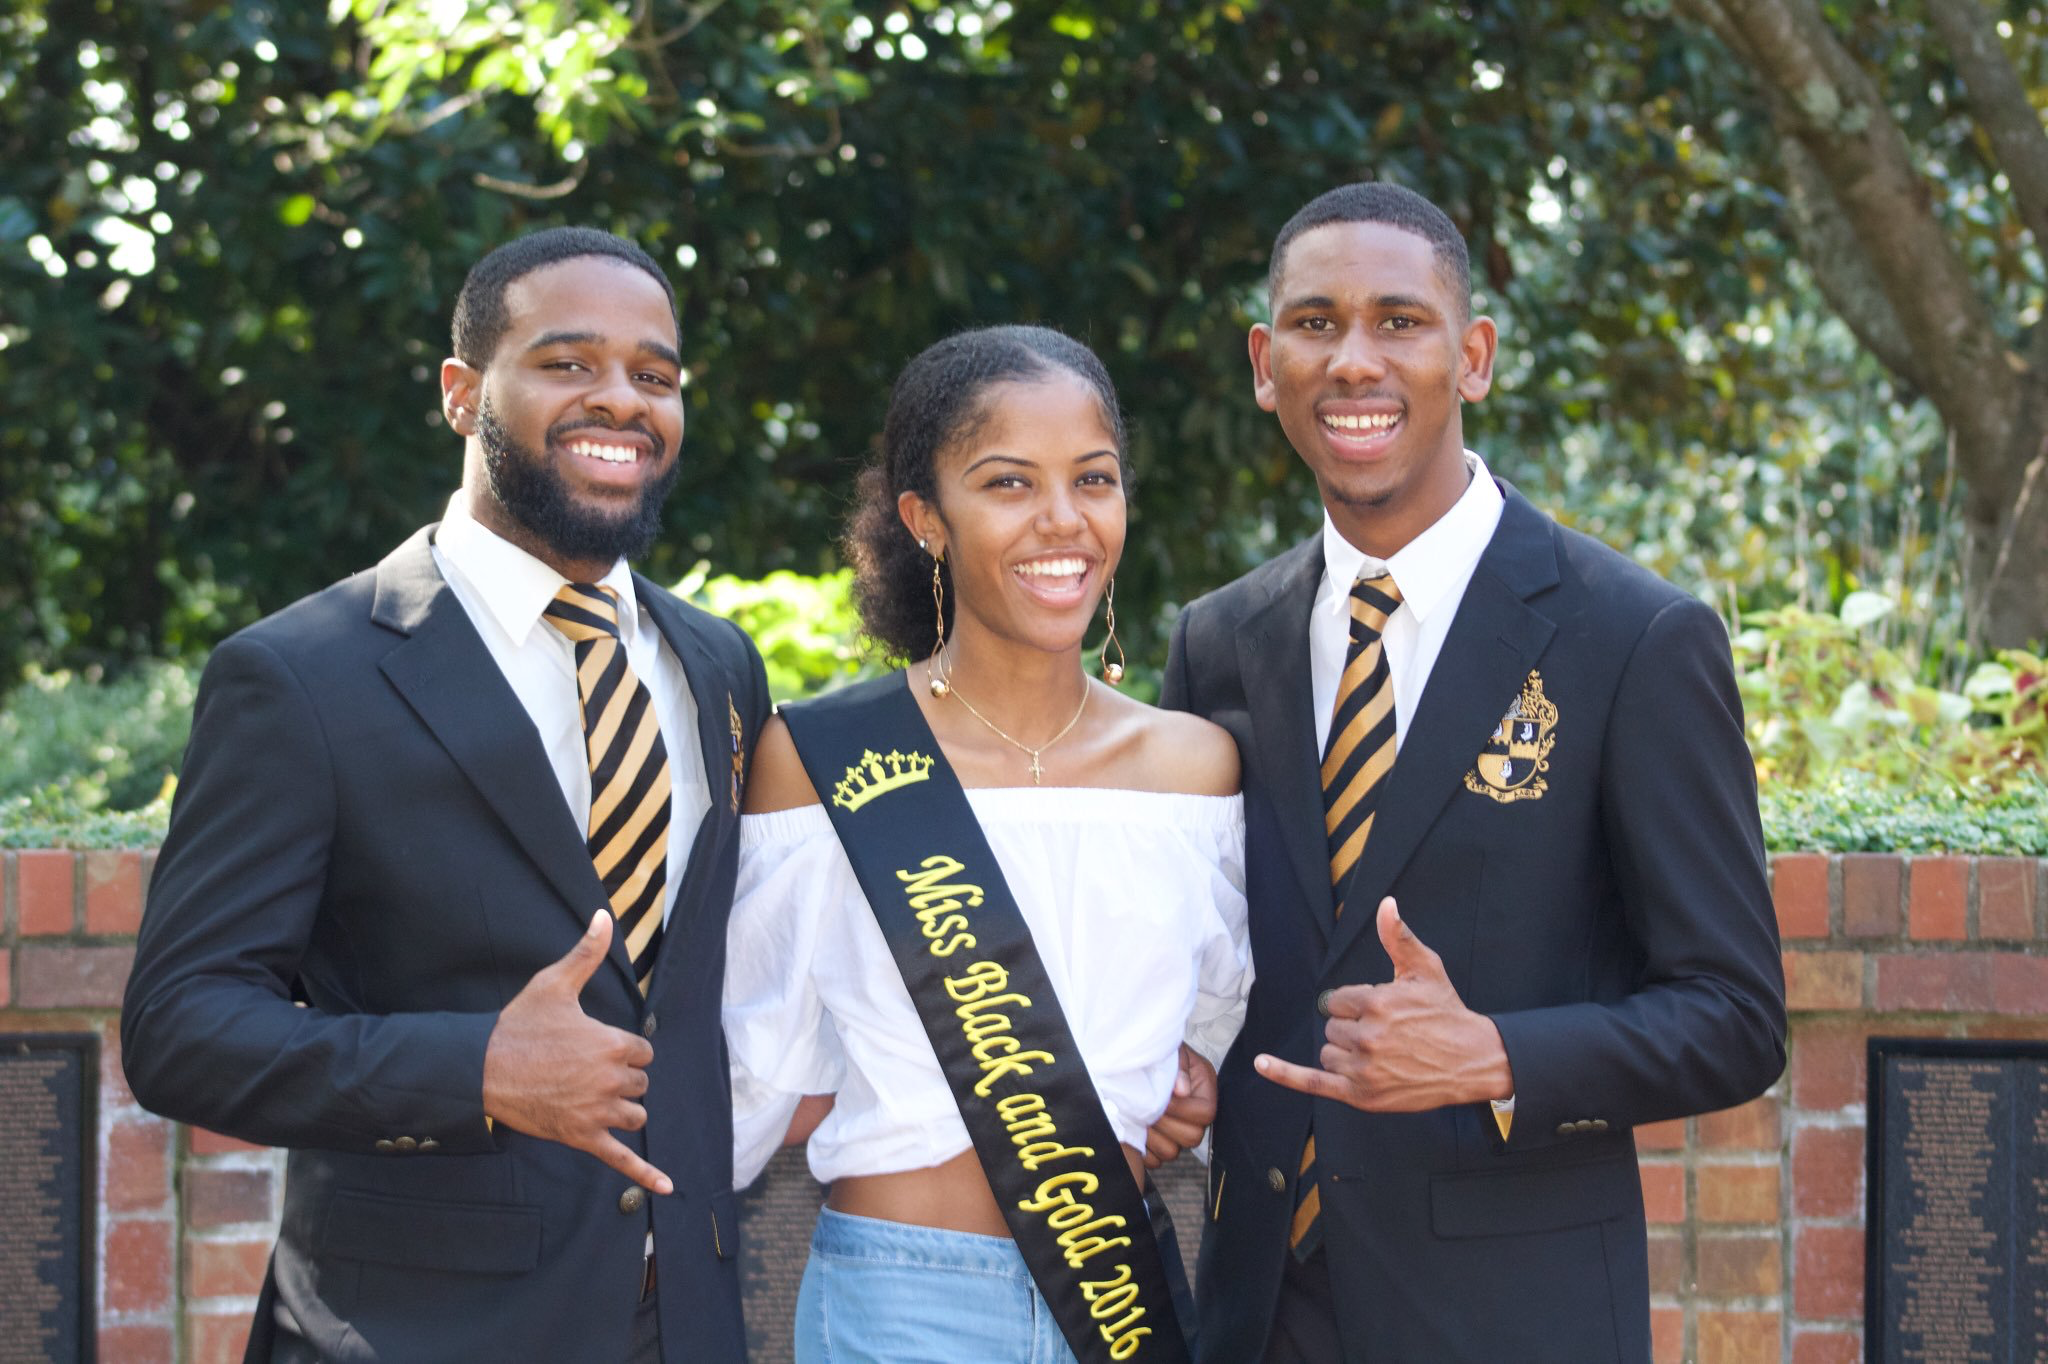 Bro. Mizelle and Bro. Barry with Miss Black & Gold, Morgan Palmer